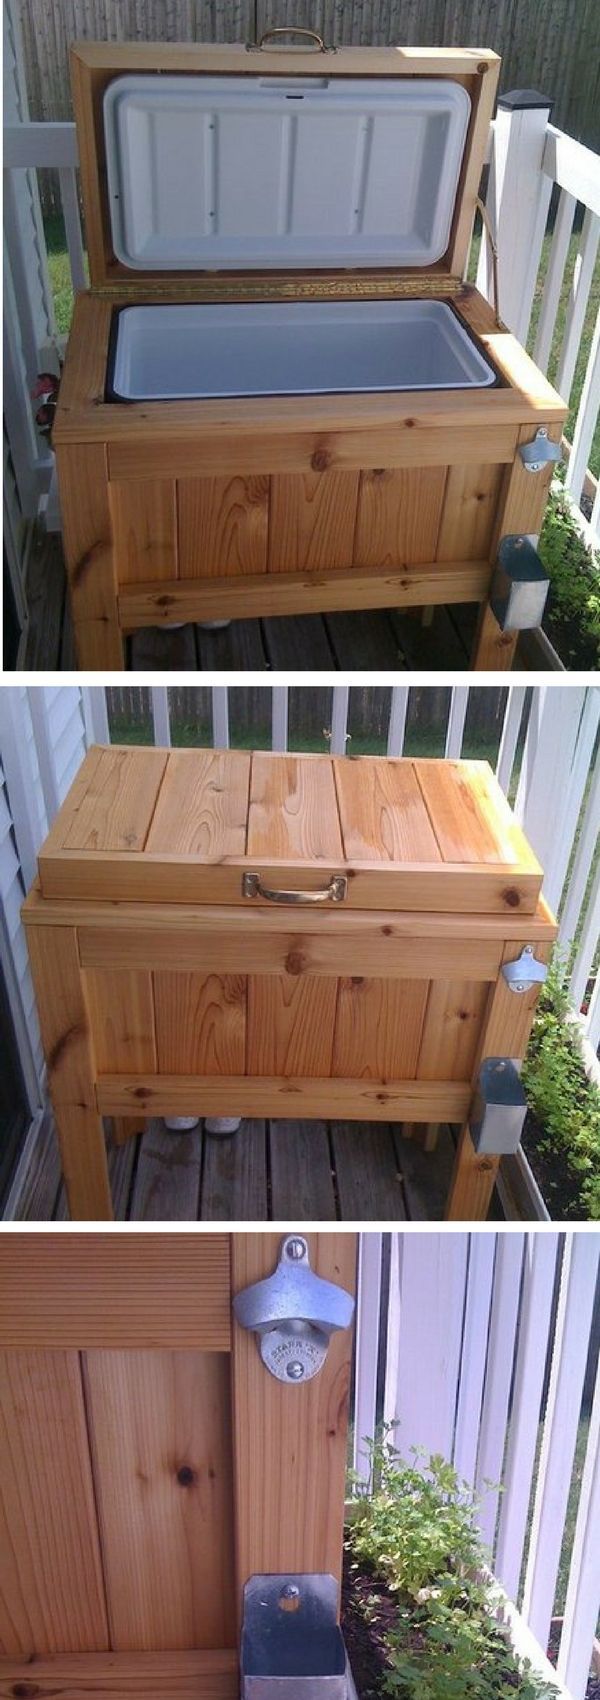 DIY Outdoor Furniture - 40 Easy Projects You Can Do Right Now -   23 diy outdoor ideas